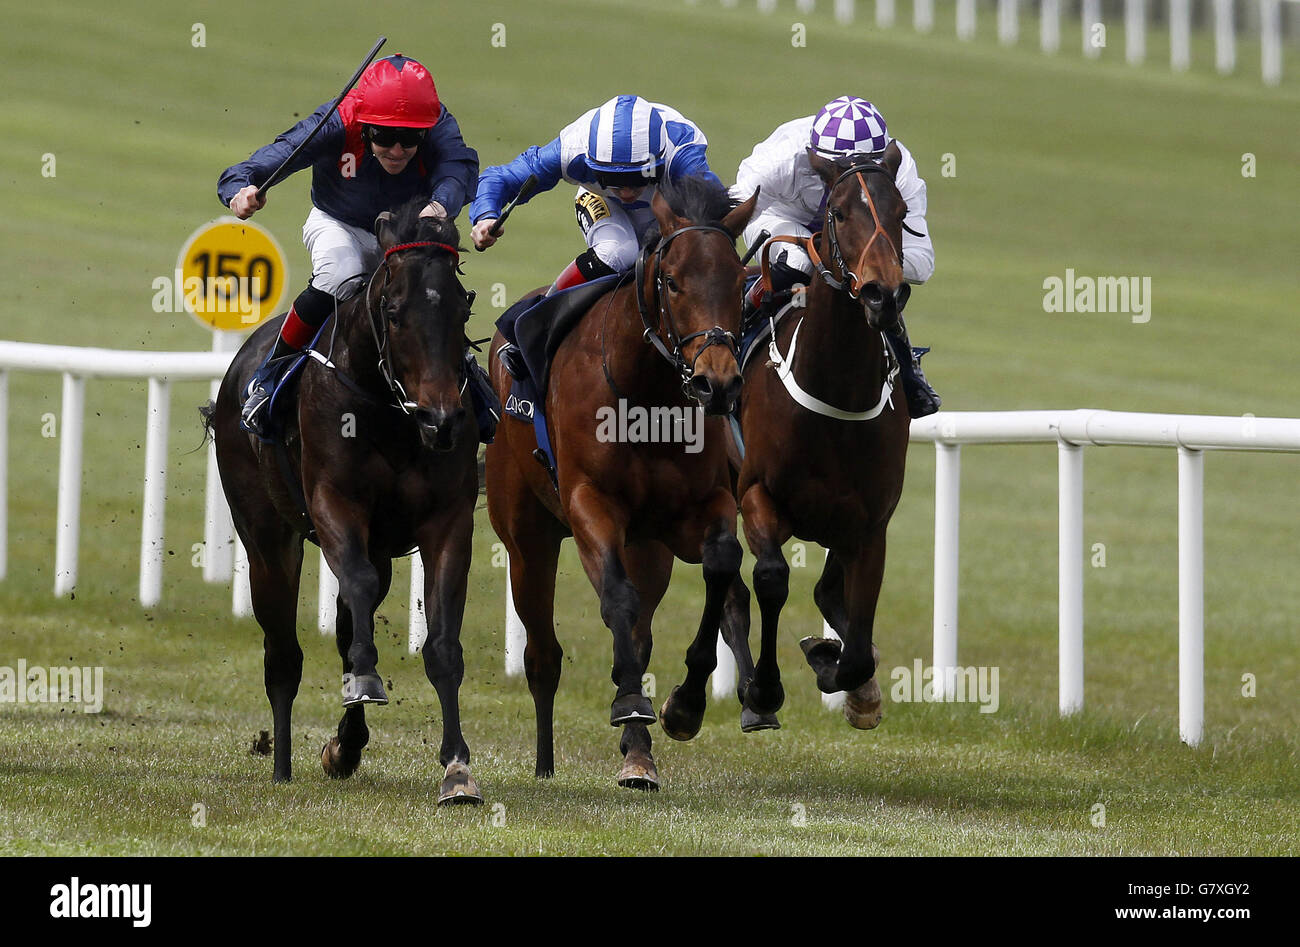 State of Emergency ridden by Emmet McNamara (left) on the way to winning the Zoffany European Breeders Fund Race at Curragh Racecourse, Co Kildare, Ireland. Stock Photo